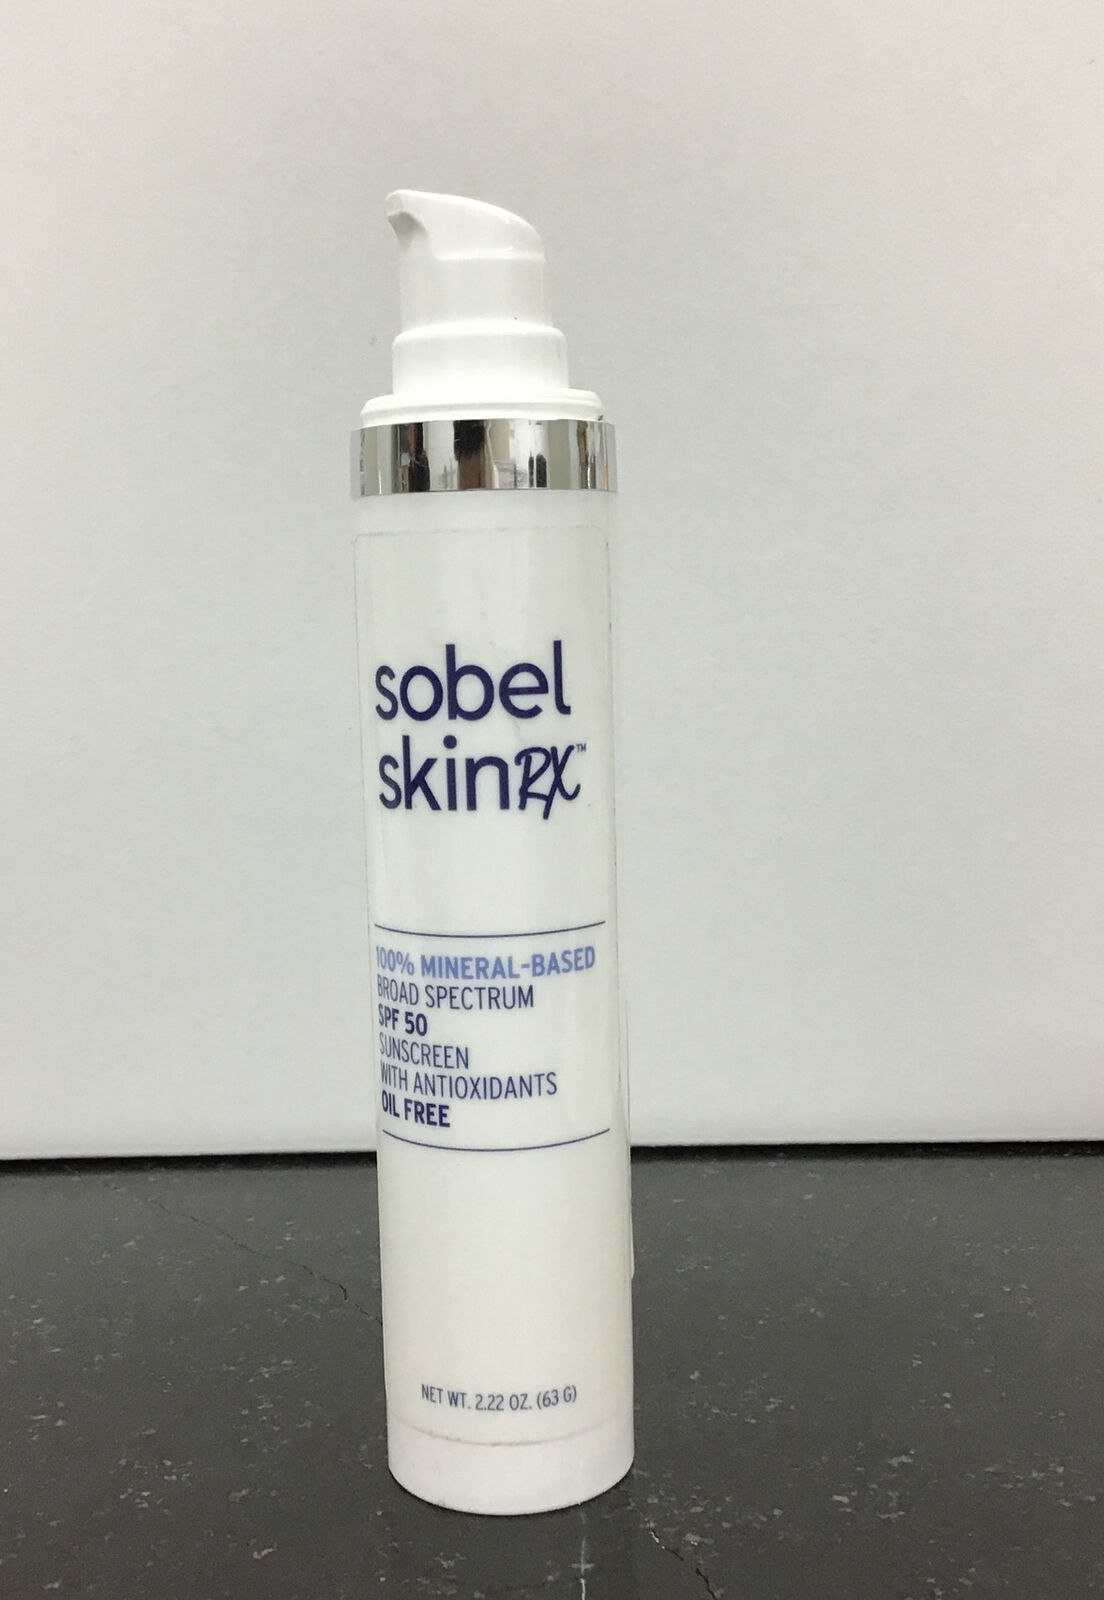 Sobel Skin Rx 100% mineral-based Sunscreen SPF 50 oil free 2.22 oz As pictured.